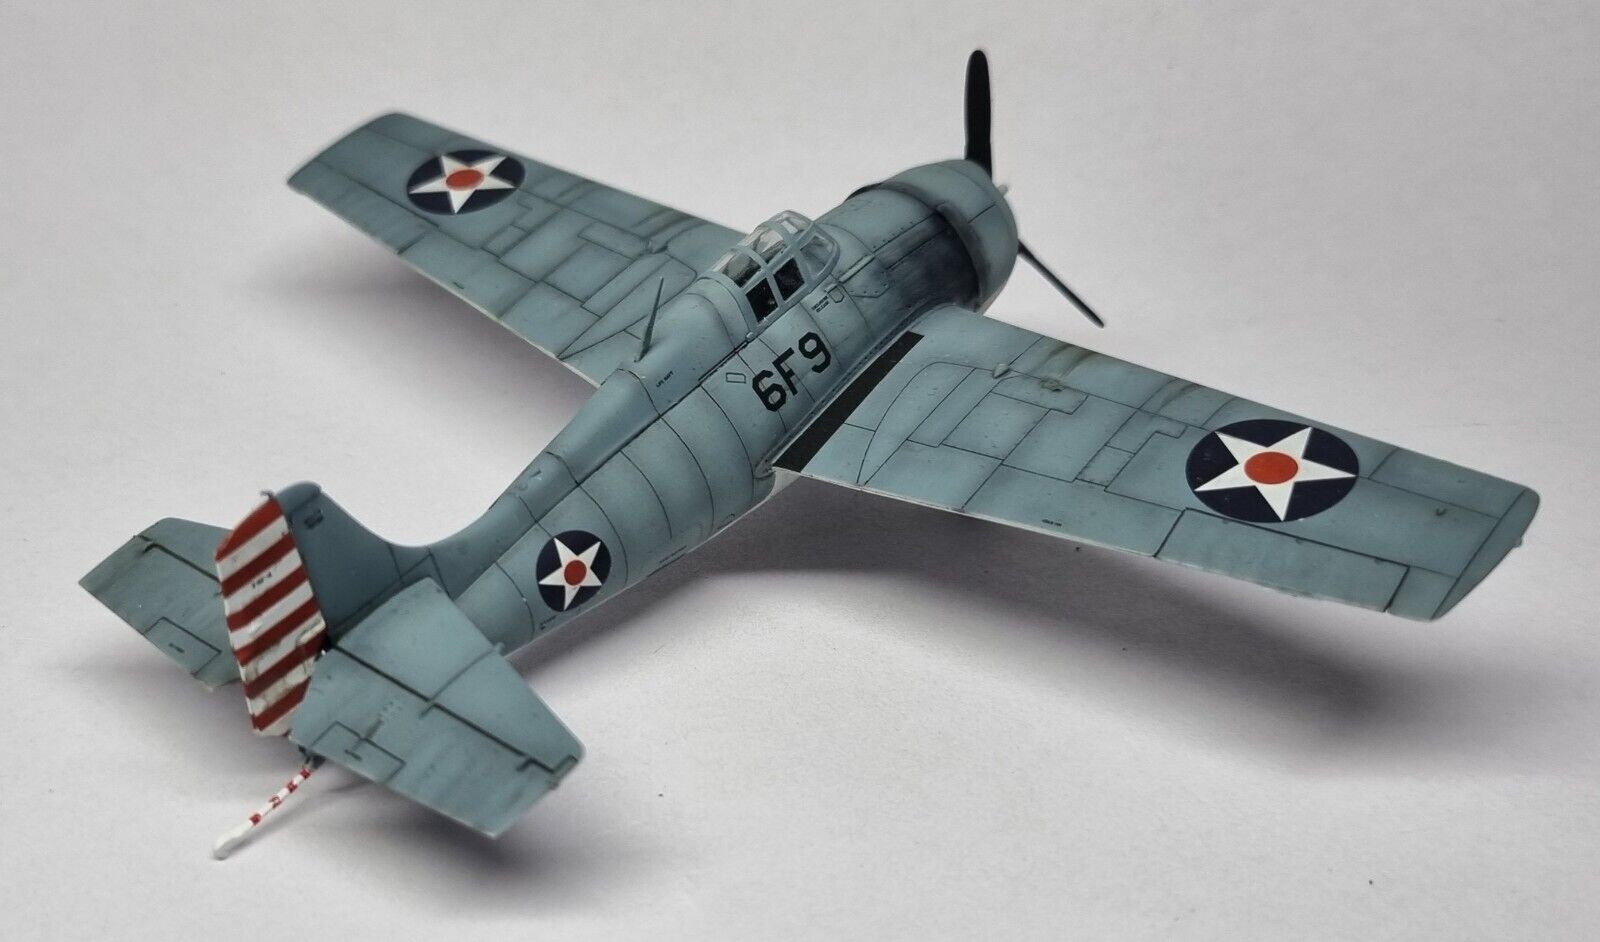 Airfix  F4f-f Wildcat 1/72 ready built and painted. 